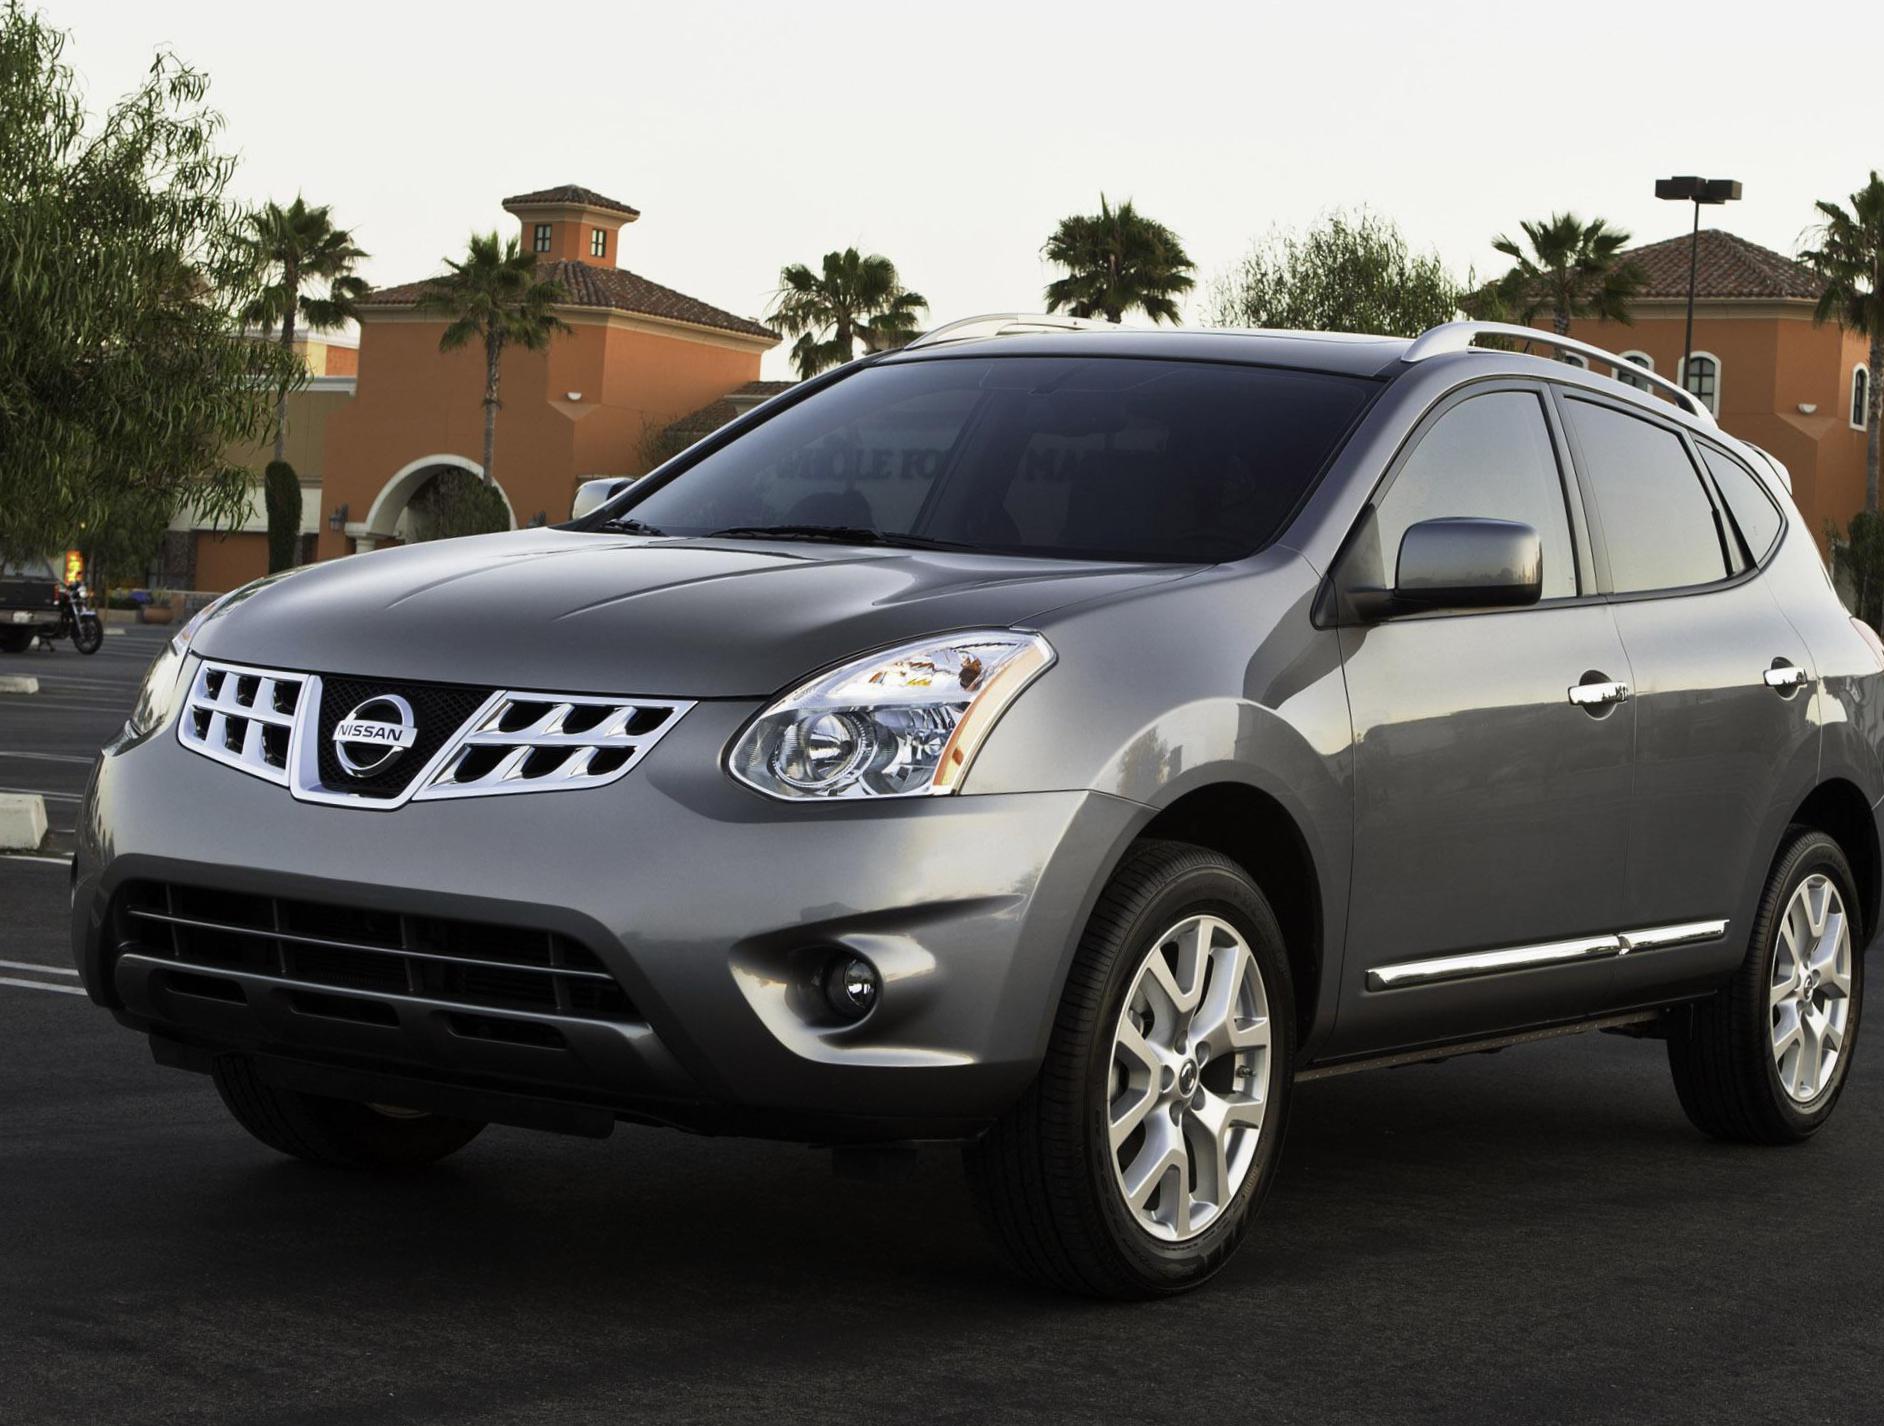 Rogue Nissan prices 2014